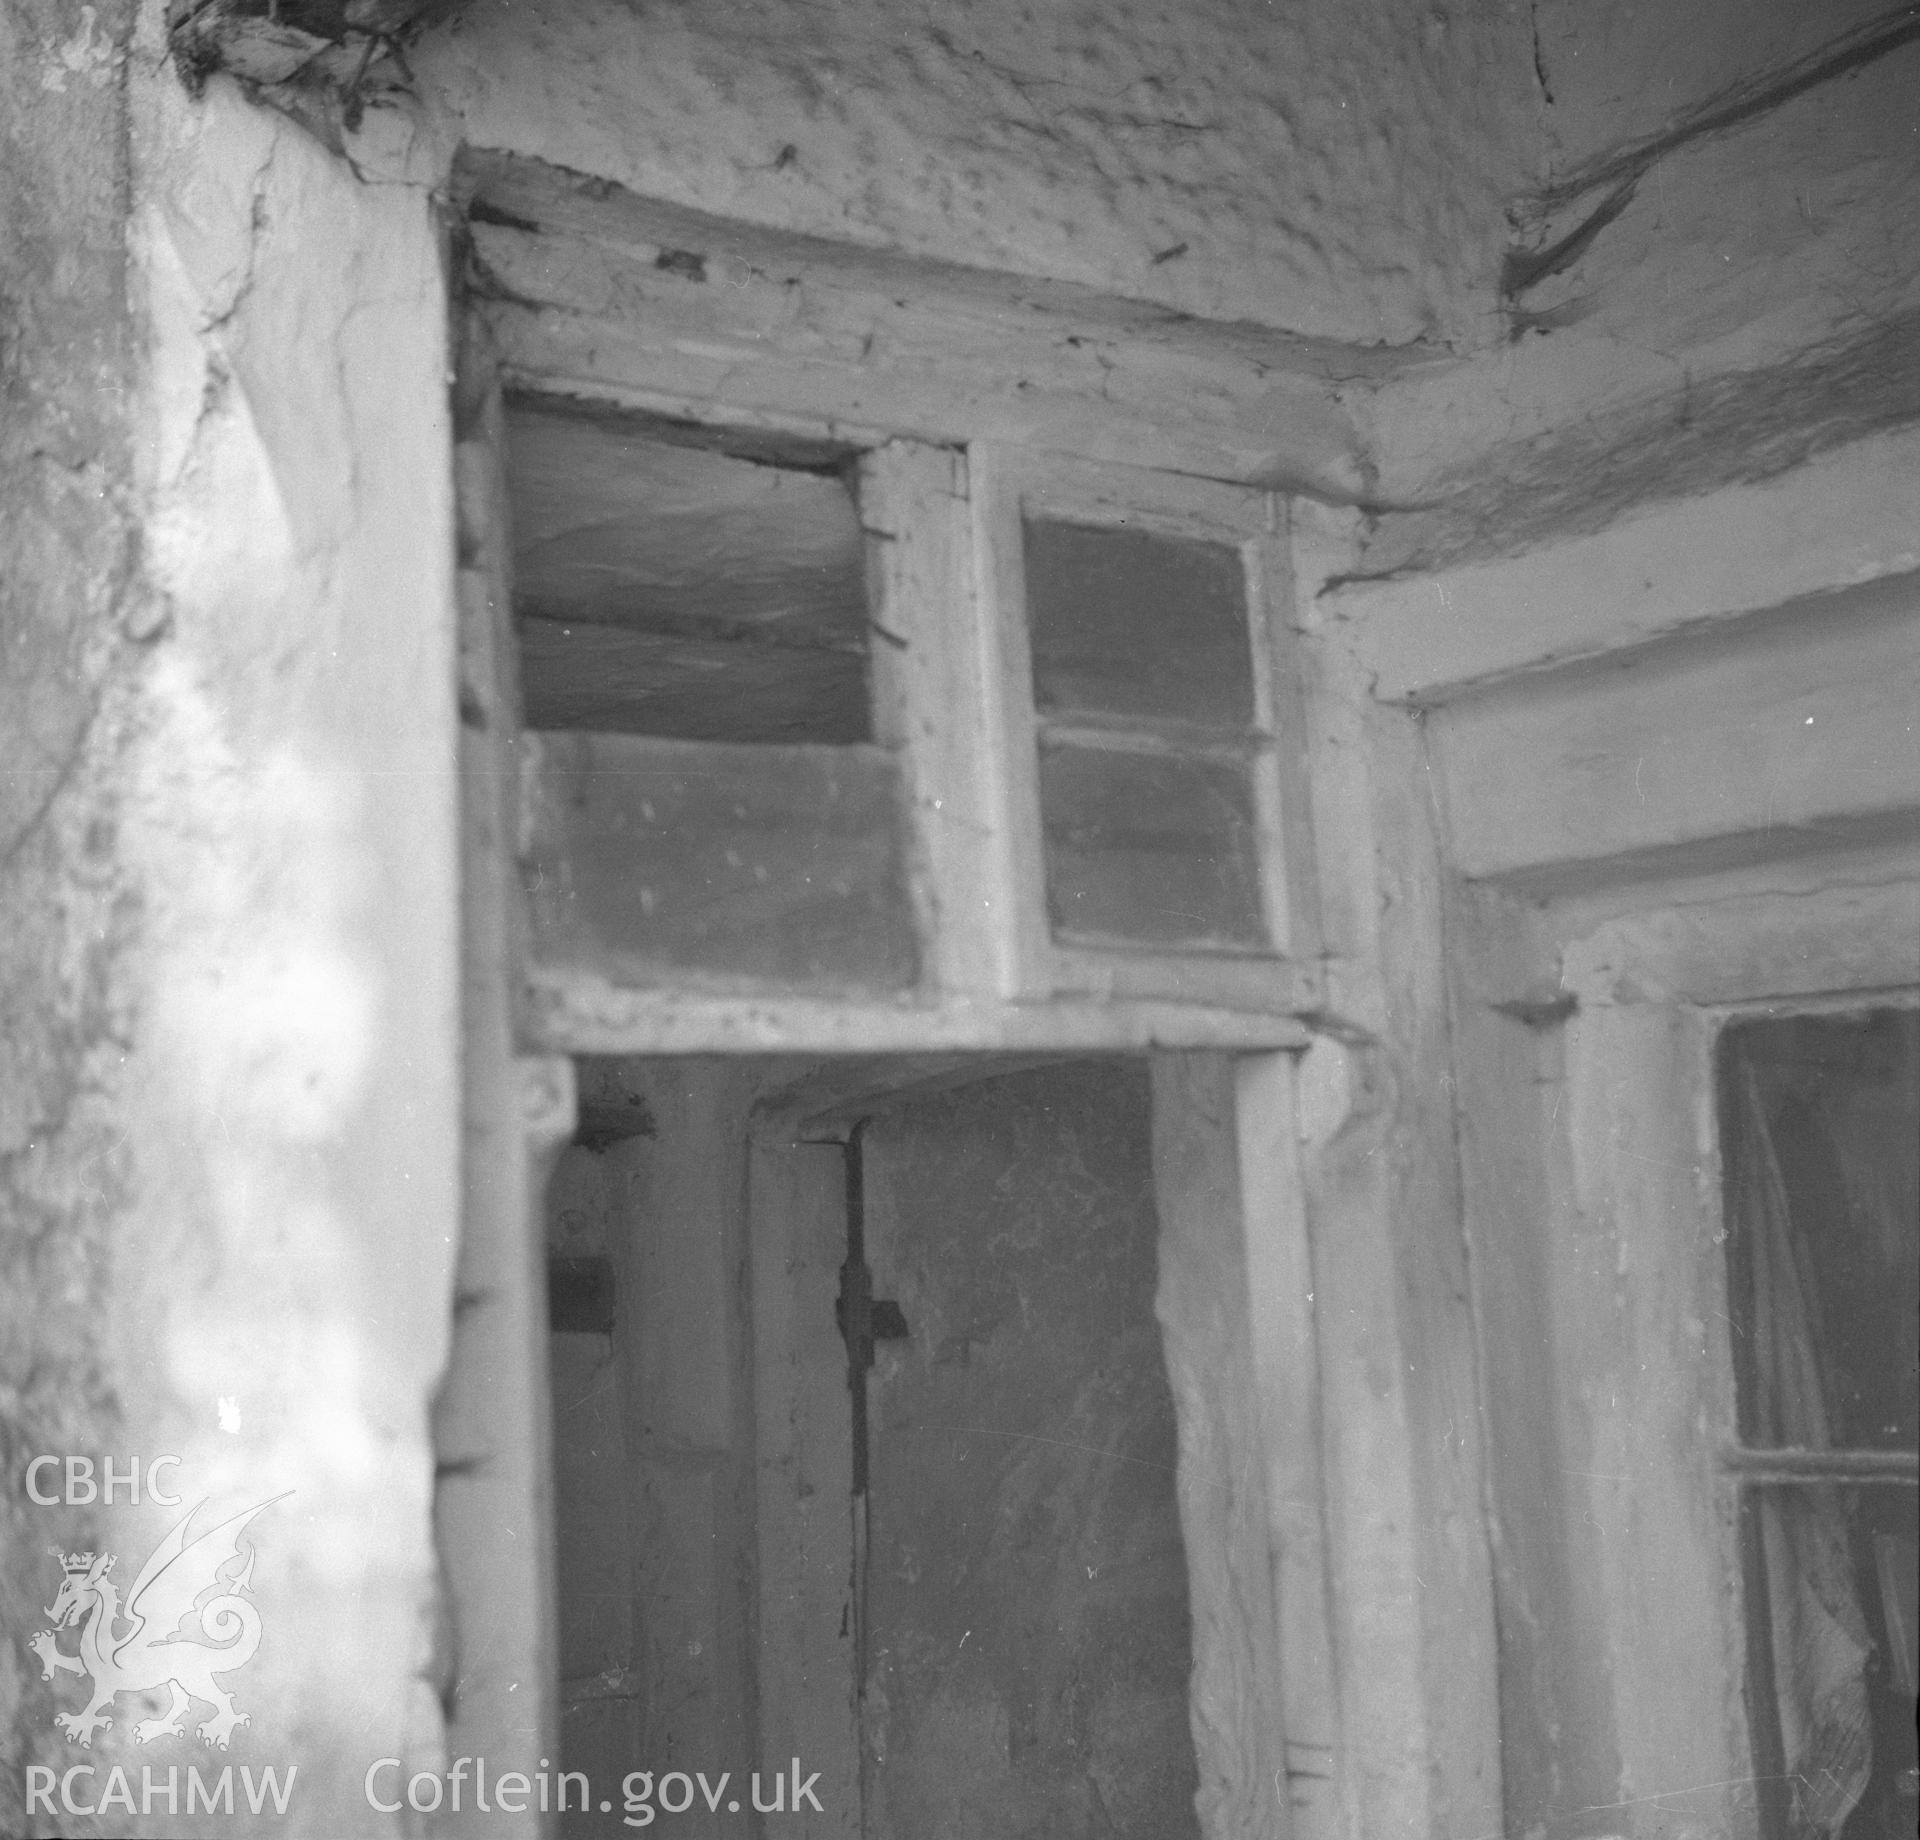 Digital copy of an undated nitrate negative showing interior beams at 40 Cross Street, Abergavenny.